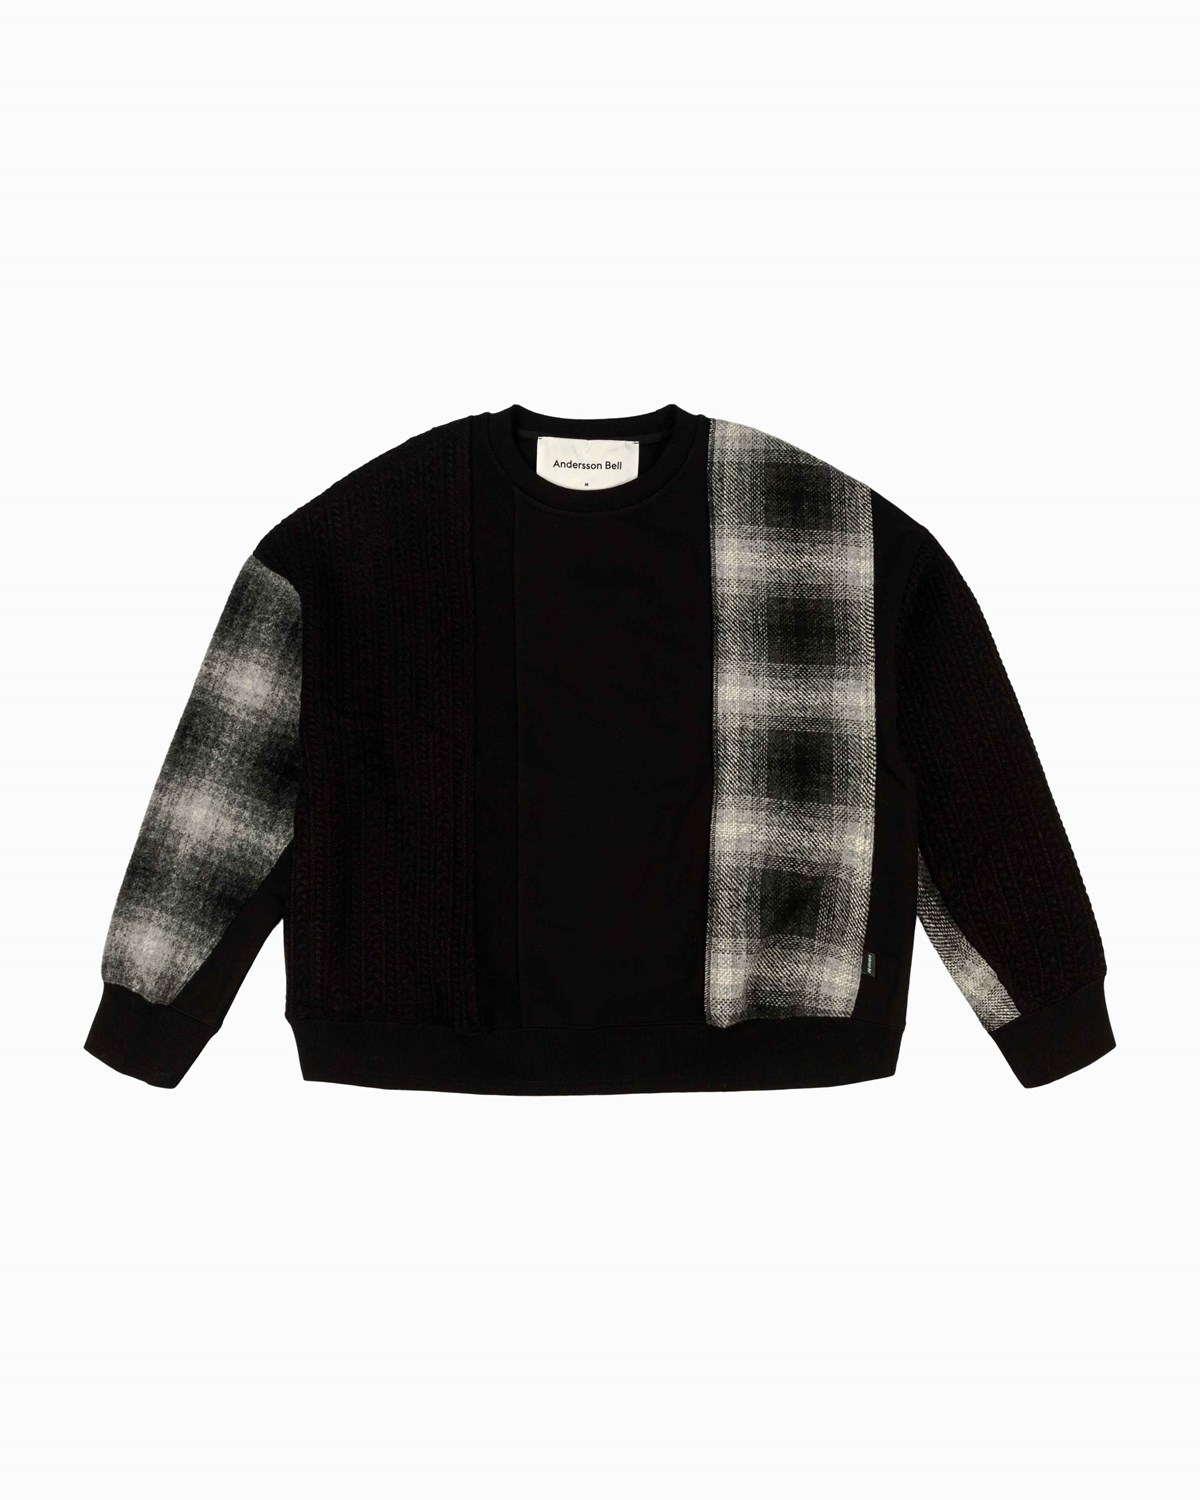 Andersson Bell FABRIC CONTRAST SWEAT